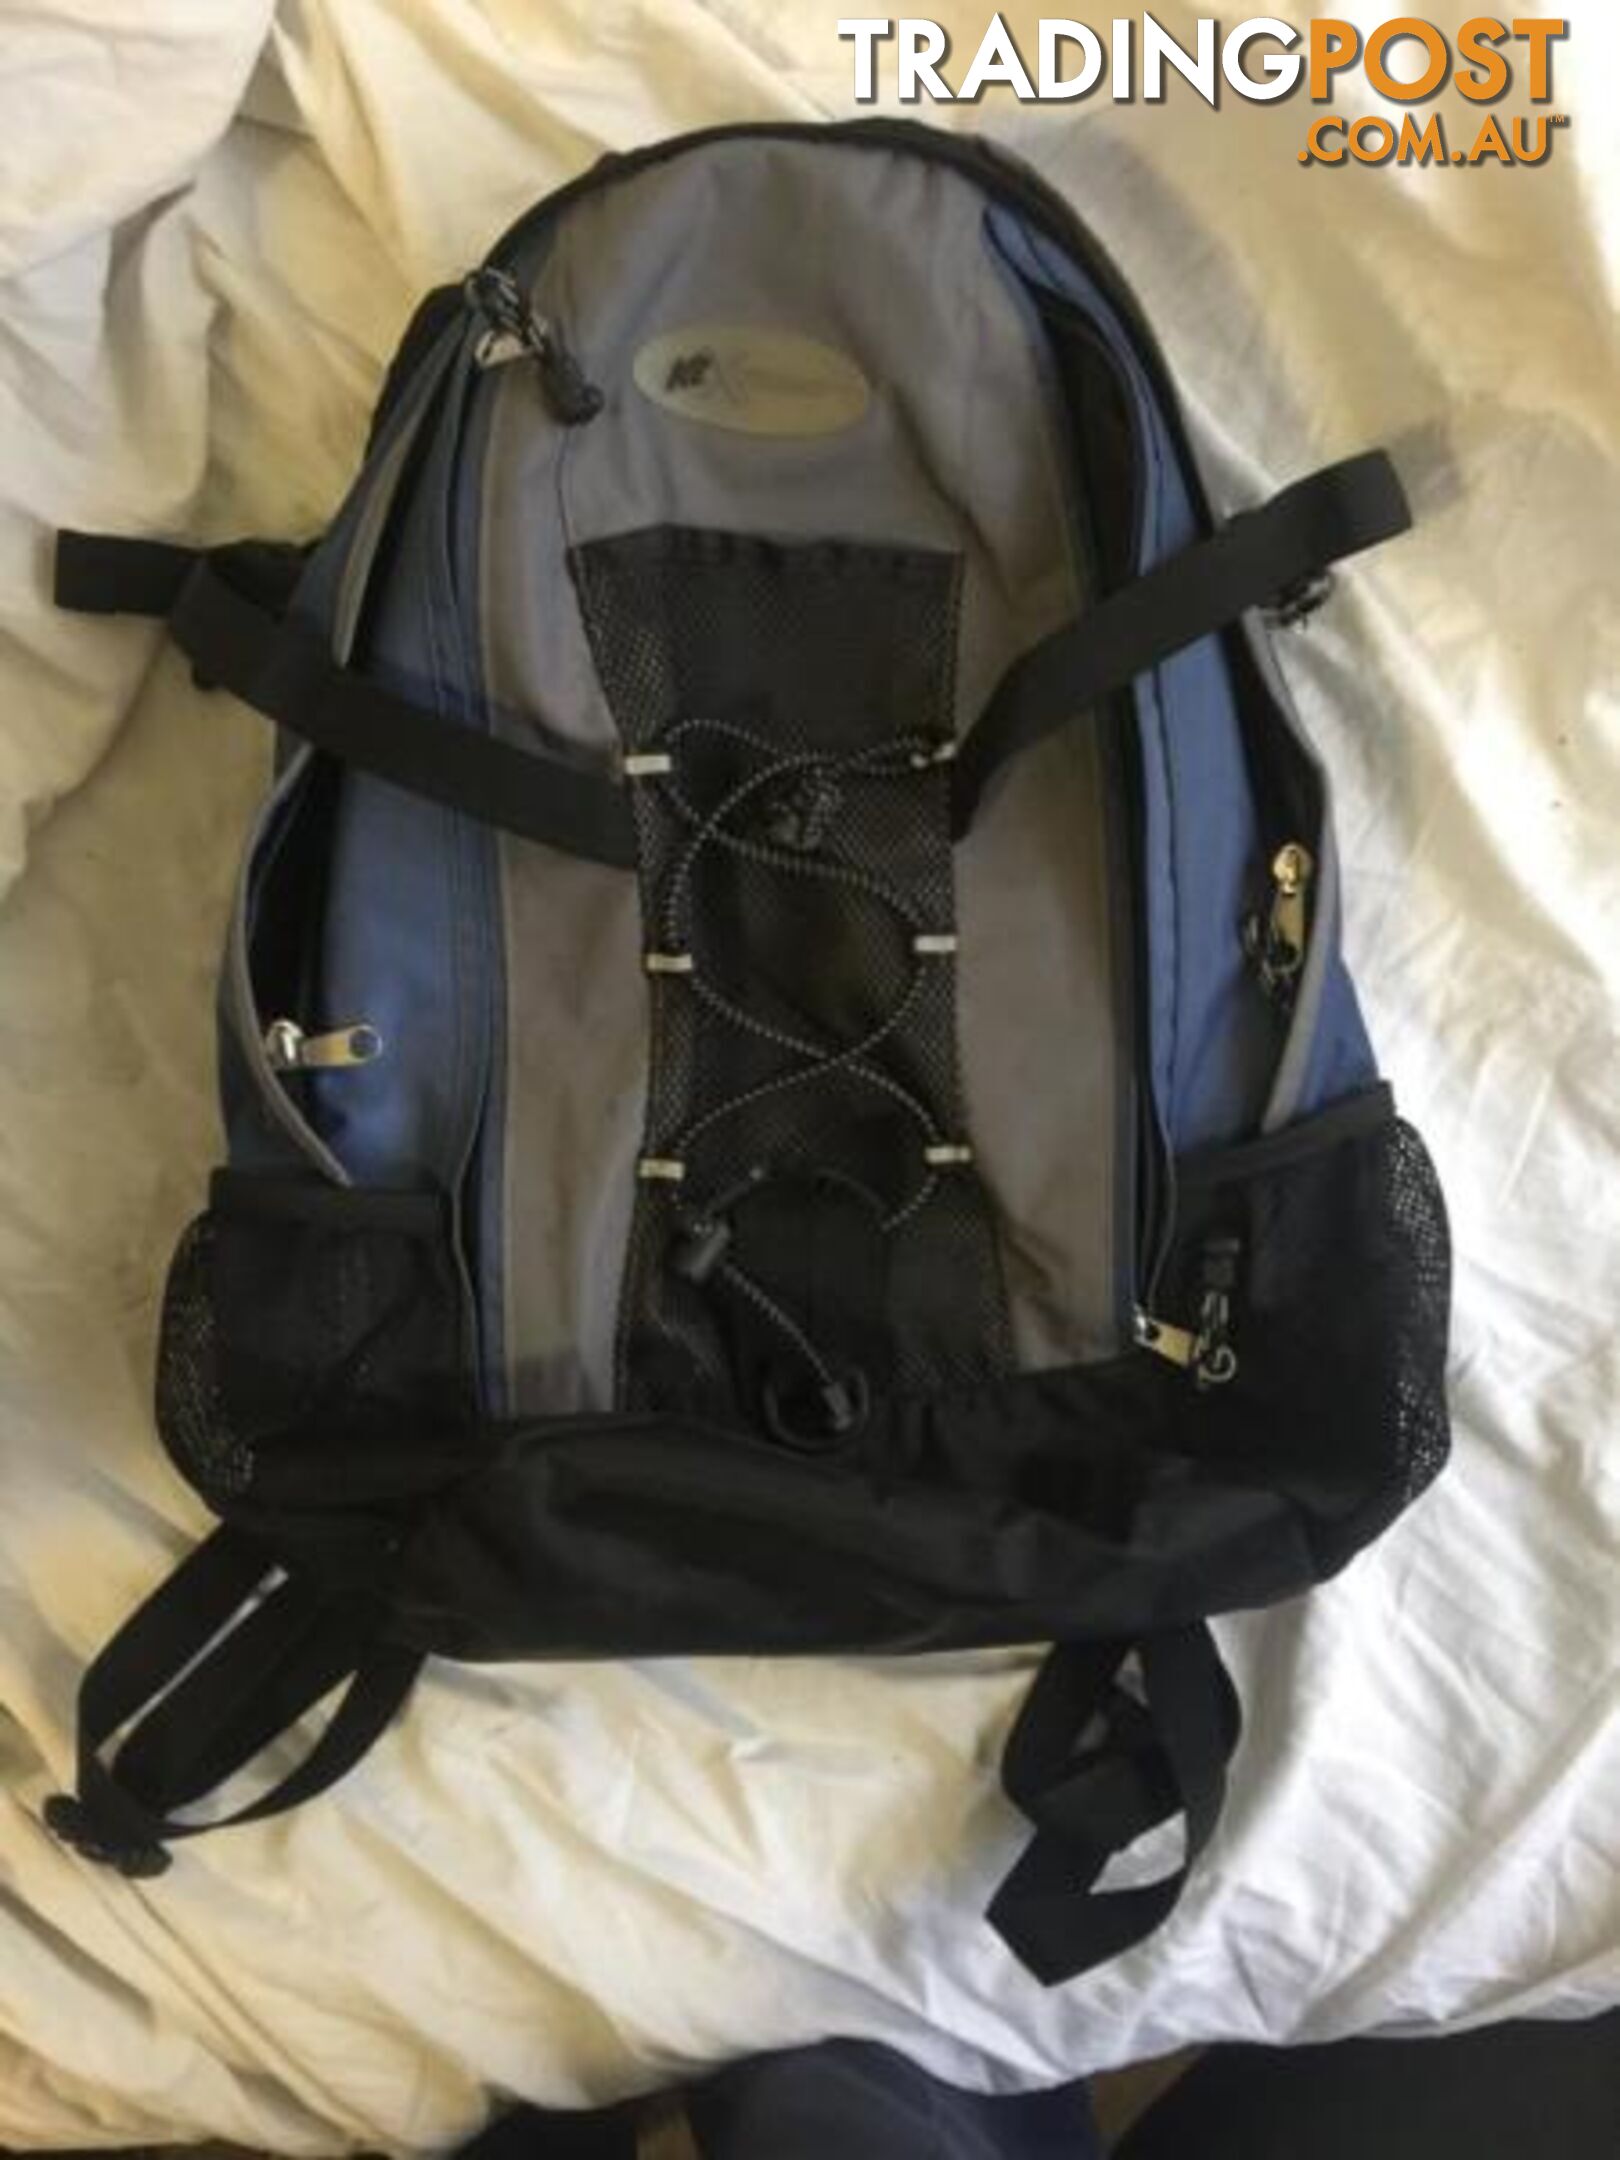 K2 Extreme backpack / travel camping / fits a lot!